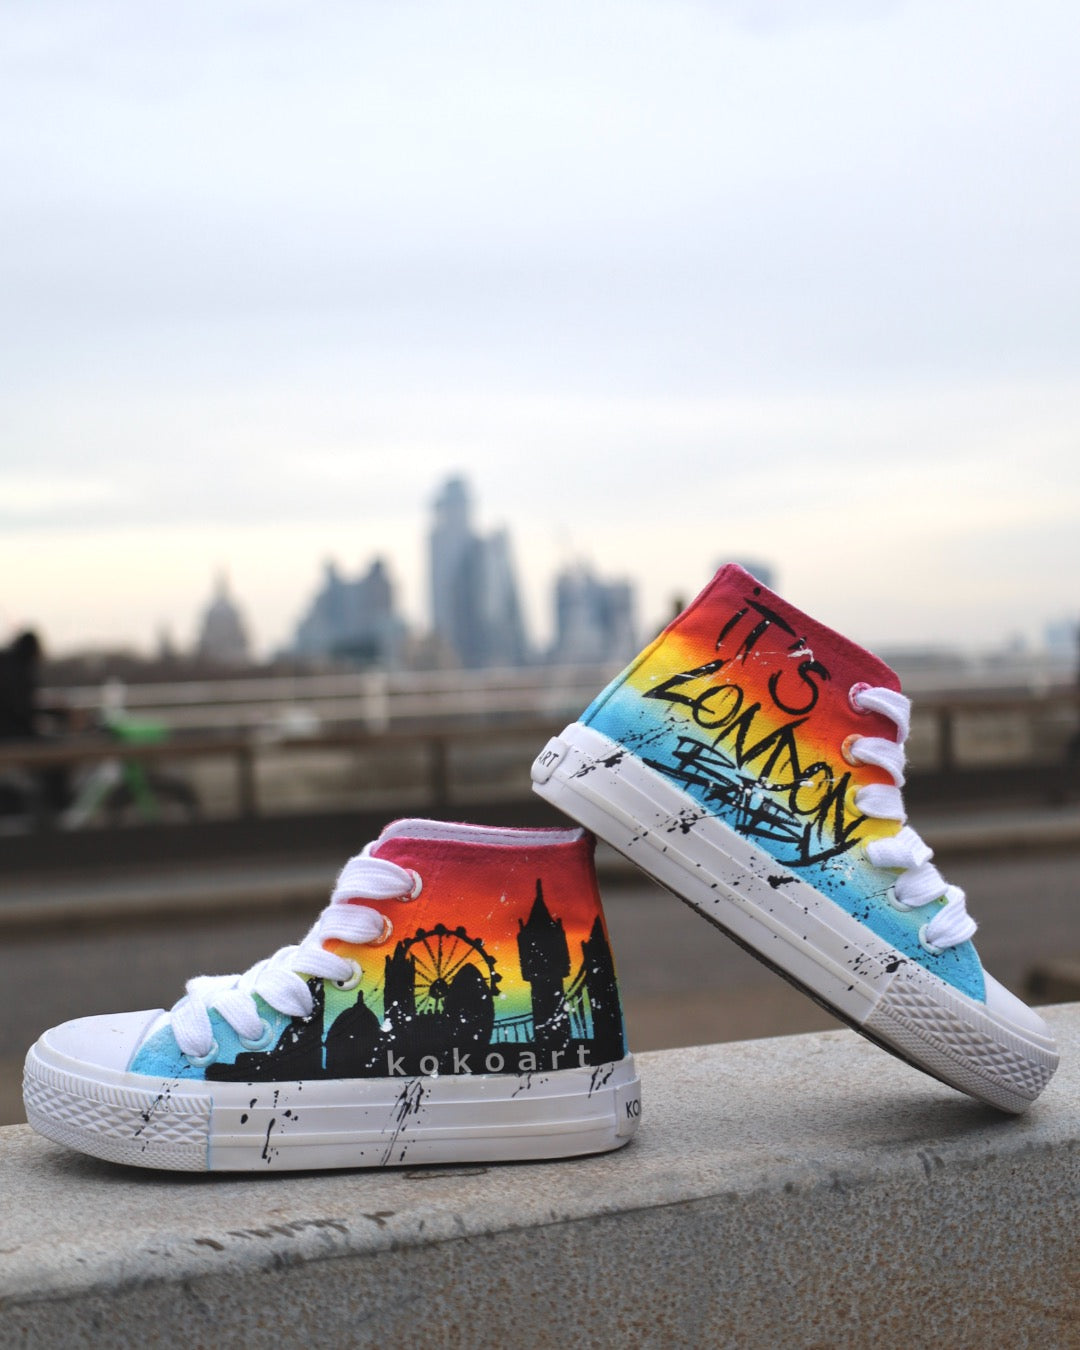 It's London Baby Hand Painted Shoes